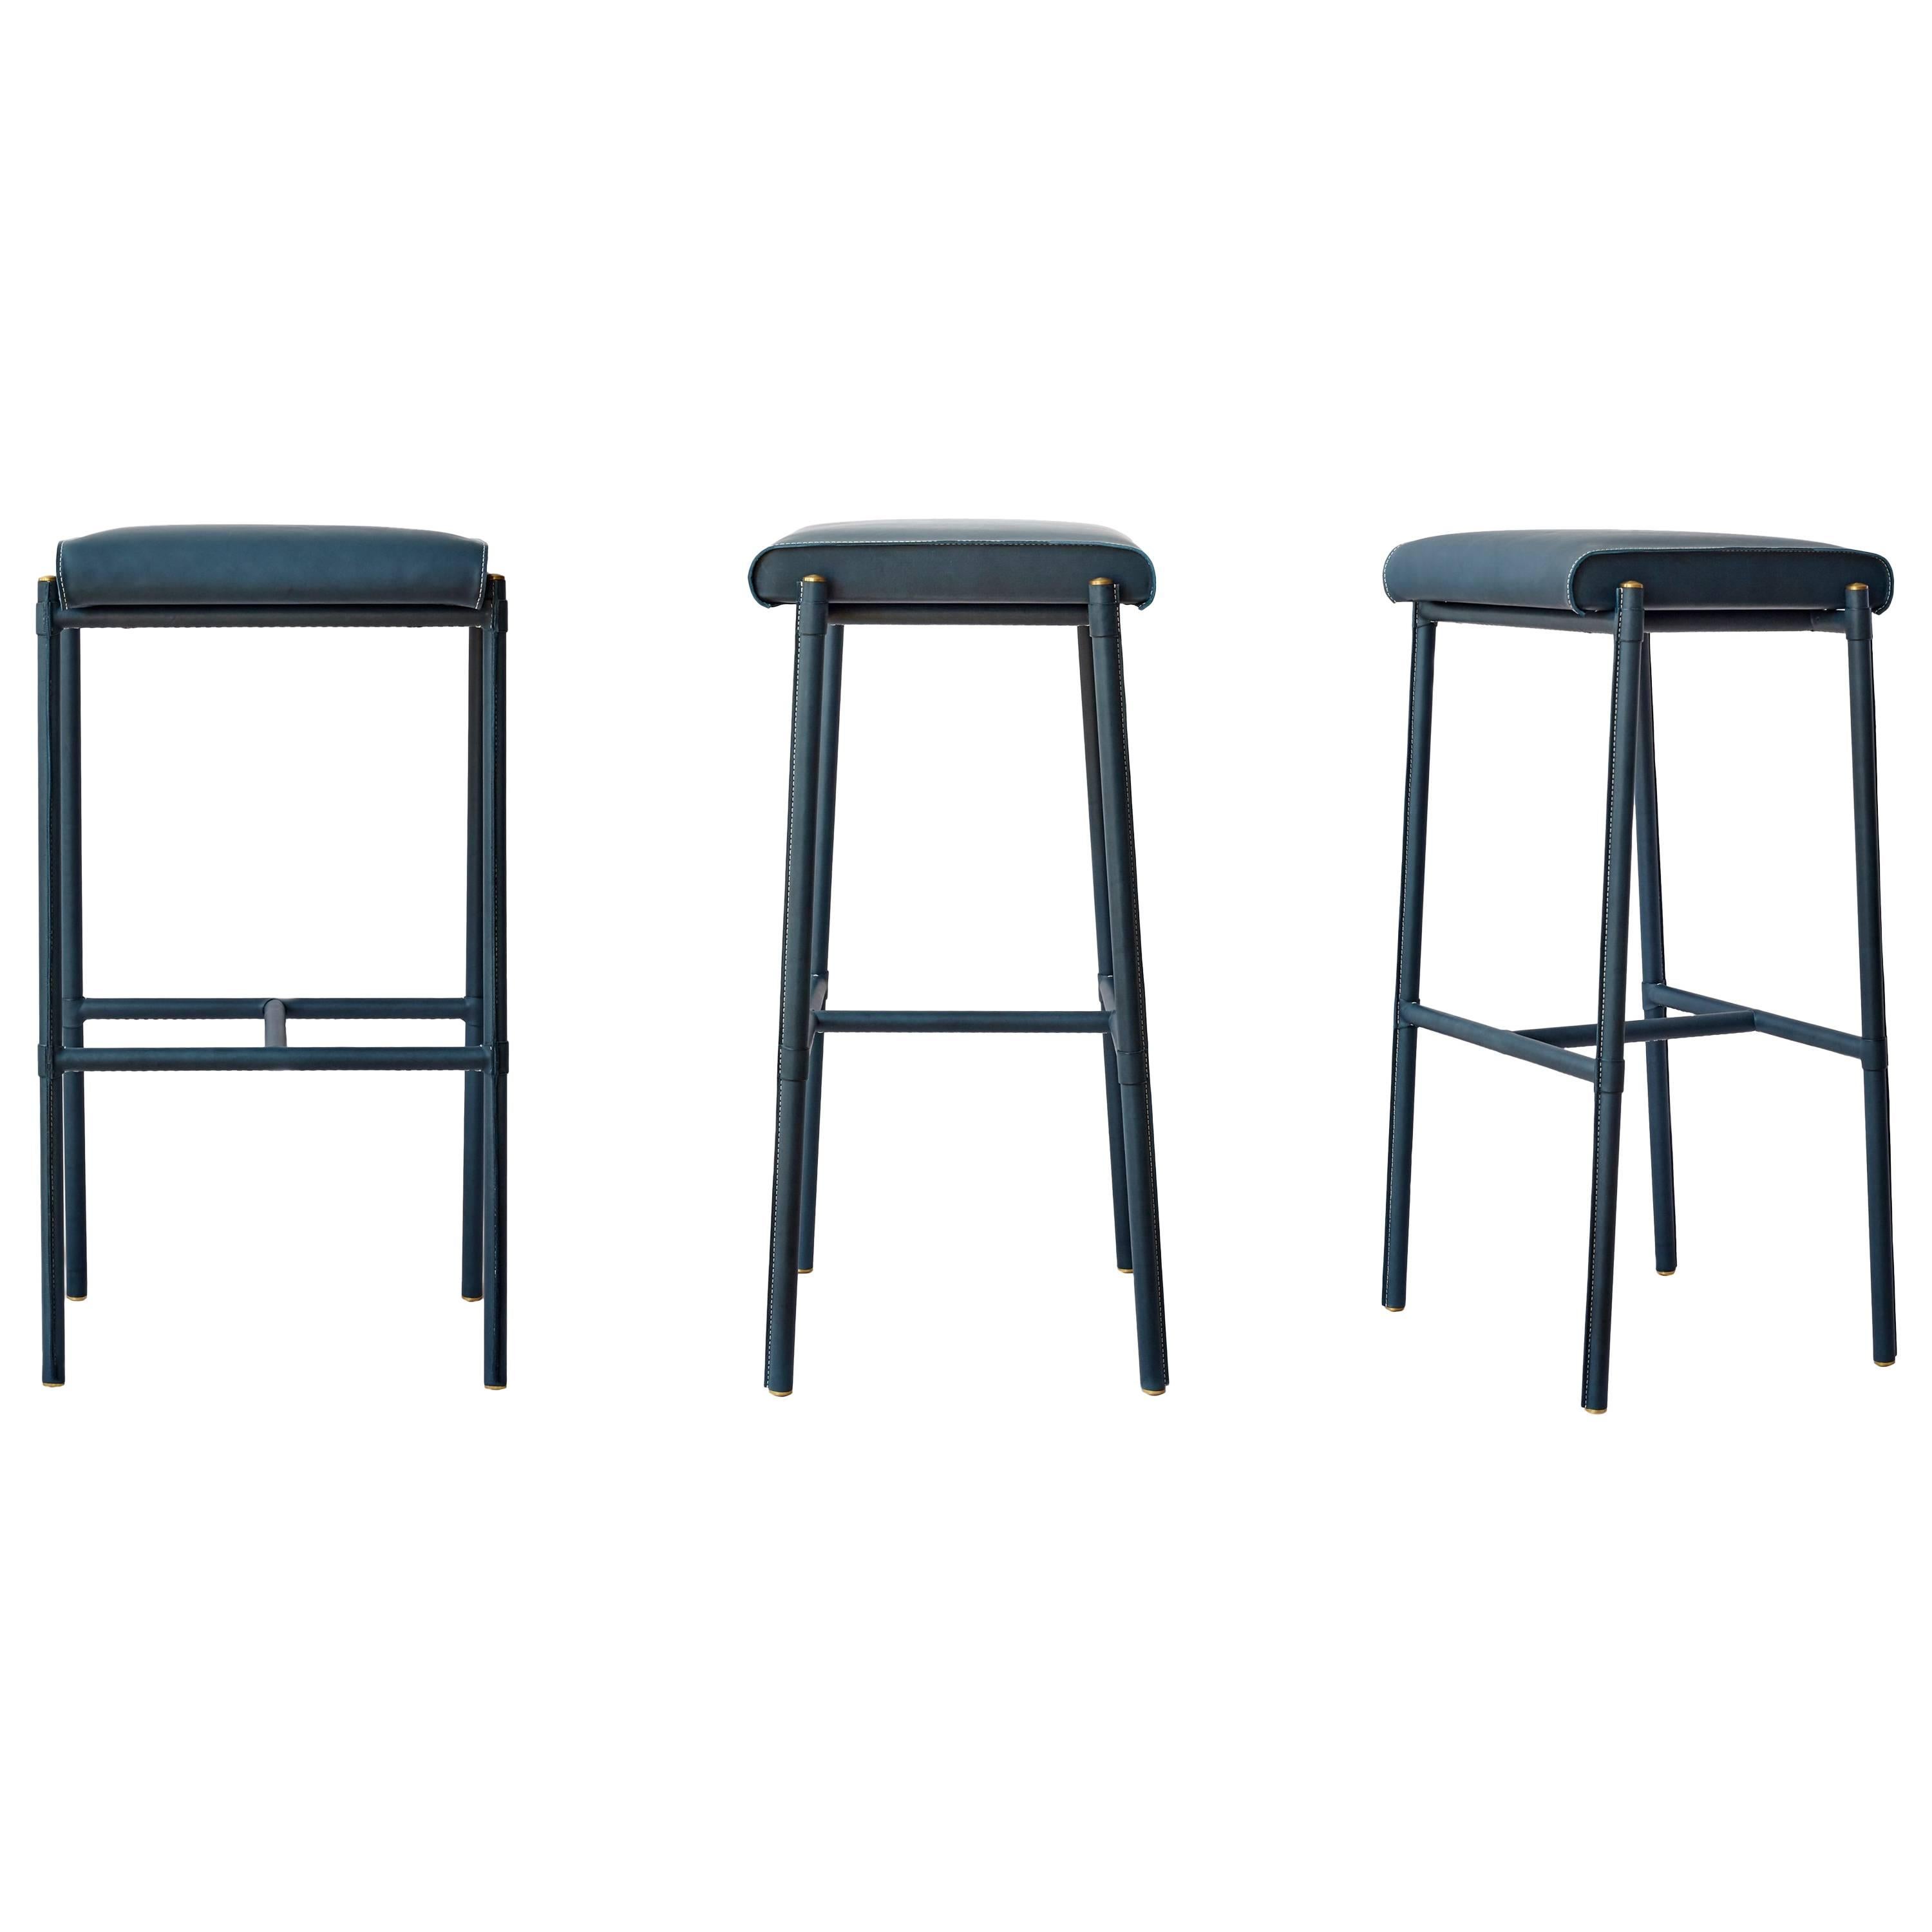 The JACQUELINE Stool was created as a tribute to Jacques Adnet's mid 20th-century leather stools with a modernized height, leather color, and hand-stitching. The stool is expertly executed in a dynamic teal with ivory hand- stitched detail and